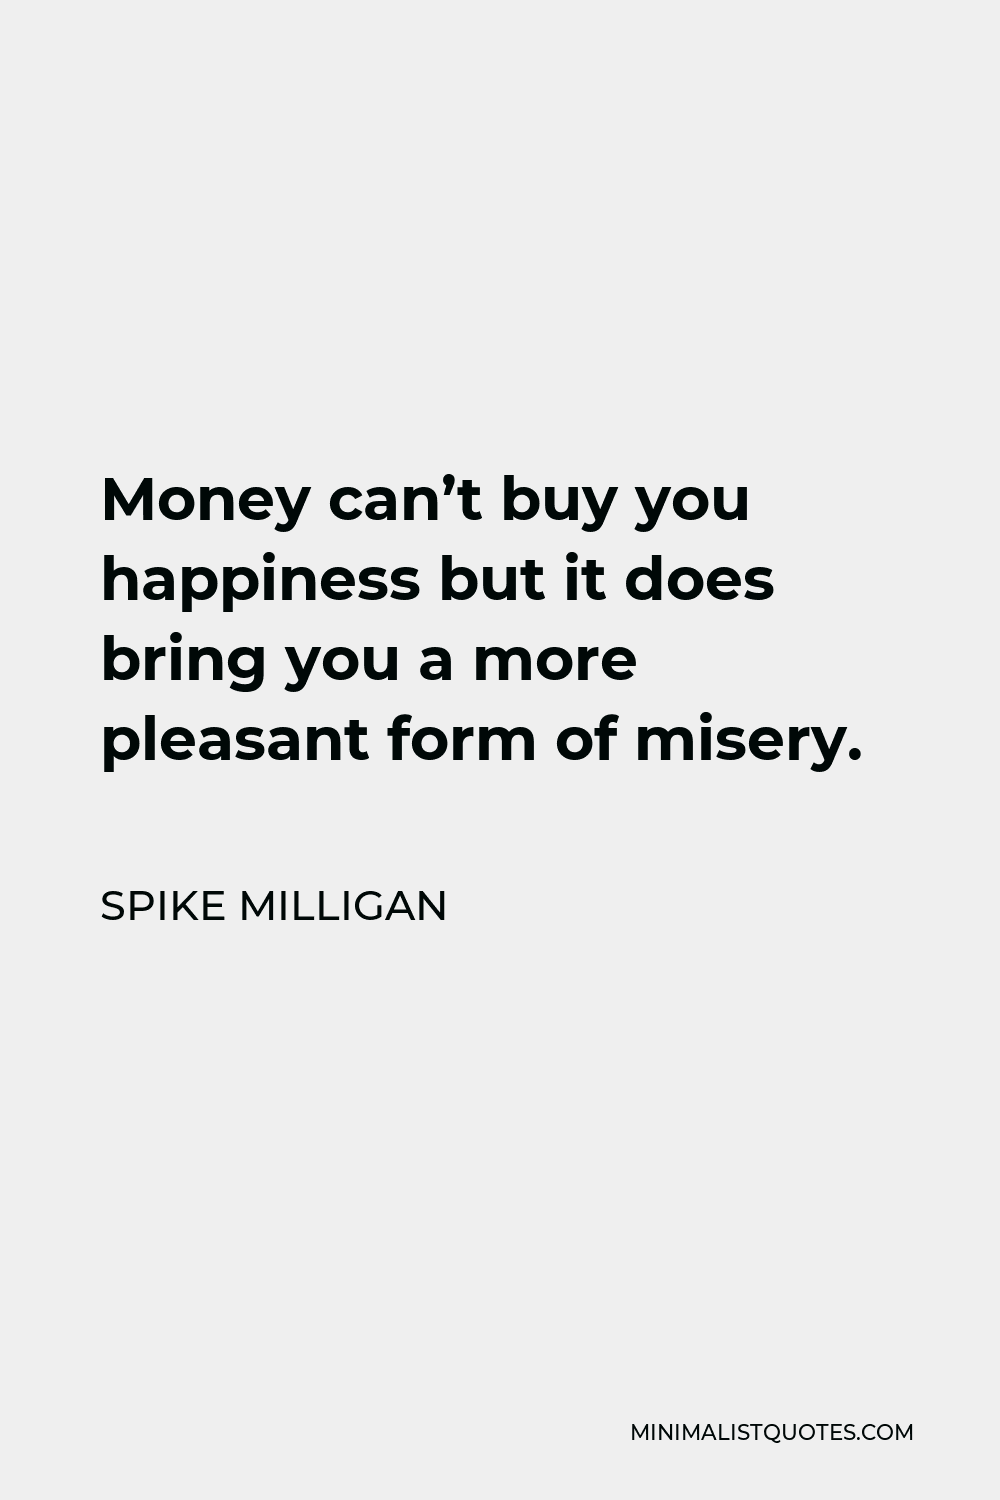 Spike Milligan Quote - Money can’t buy you happiness but it does bring you a more pleasant form of misery.